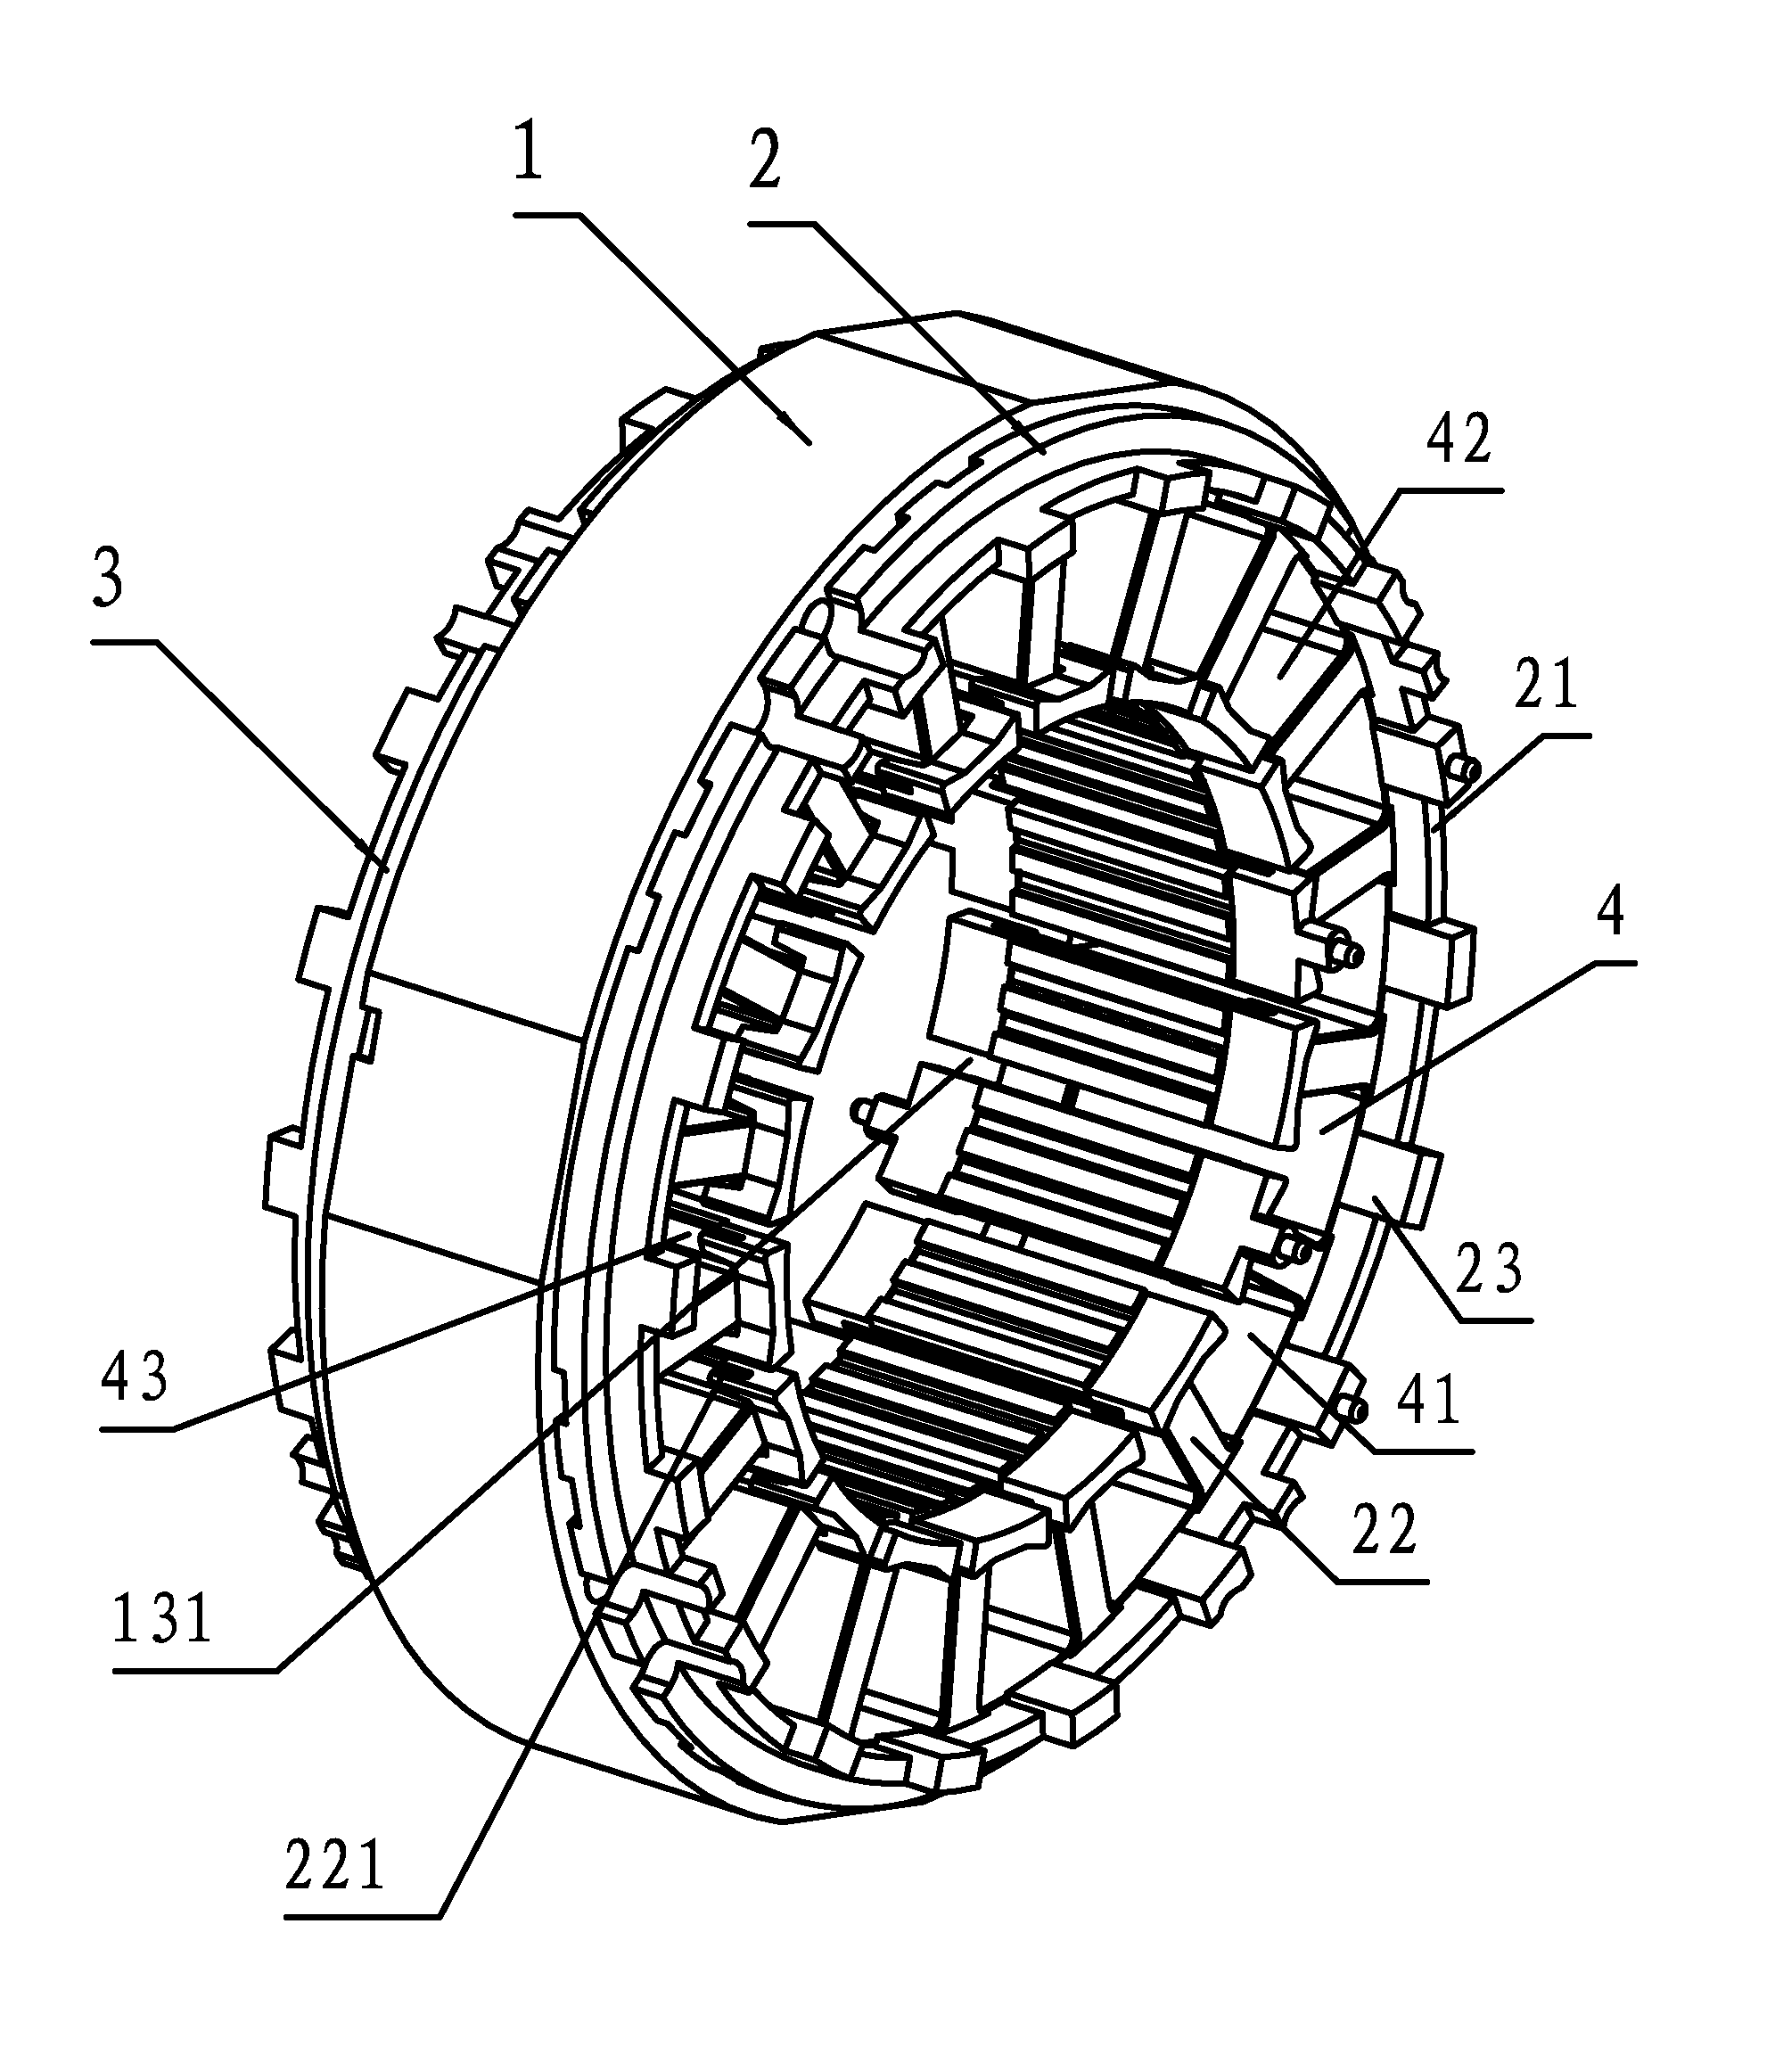 Mounting structure for slot paper in a motor stator